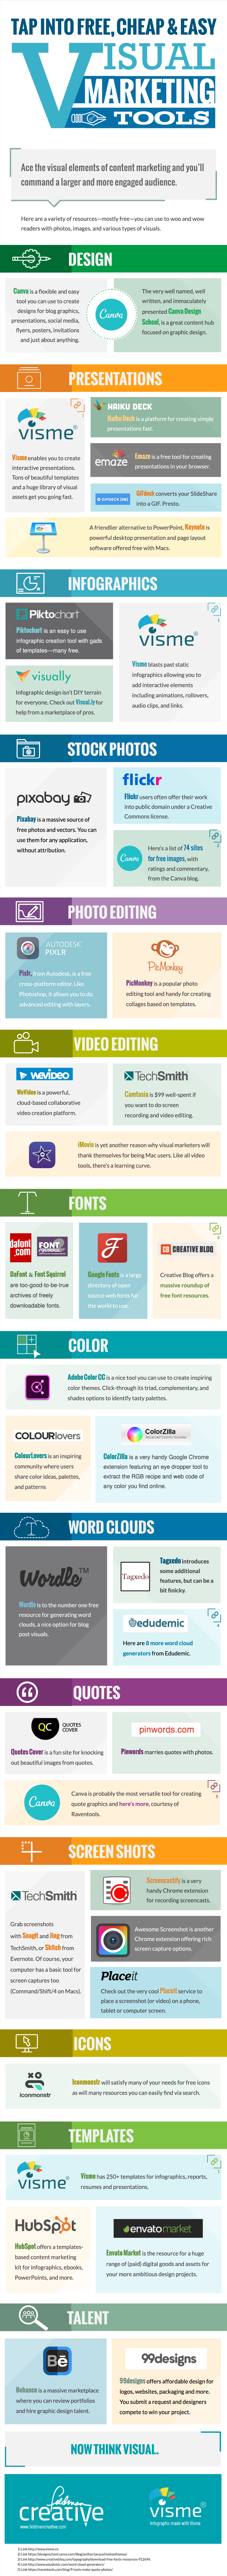 Easy Social Media Content Creation for Graphic designers - infographic